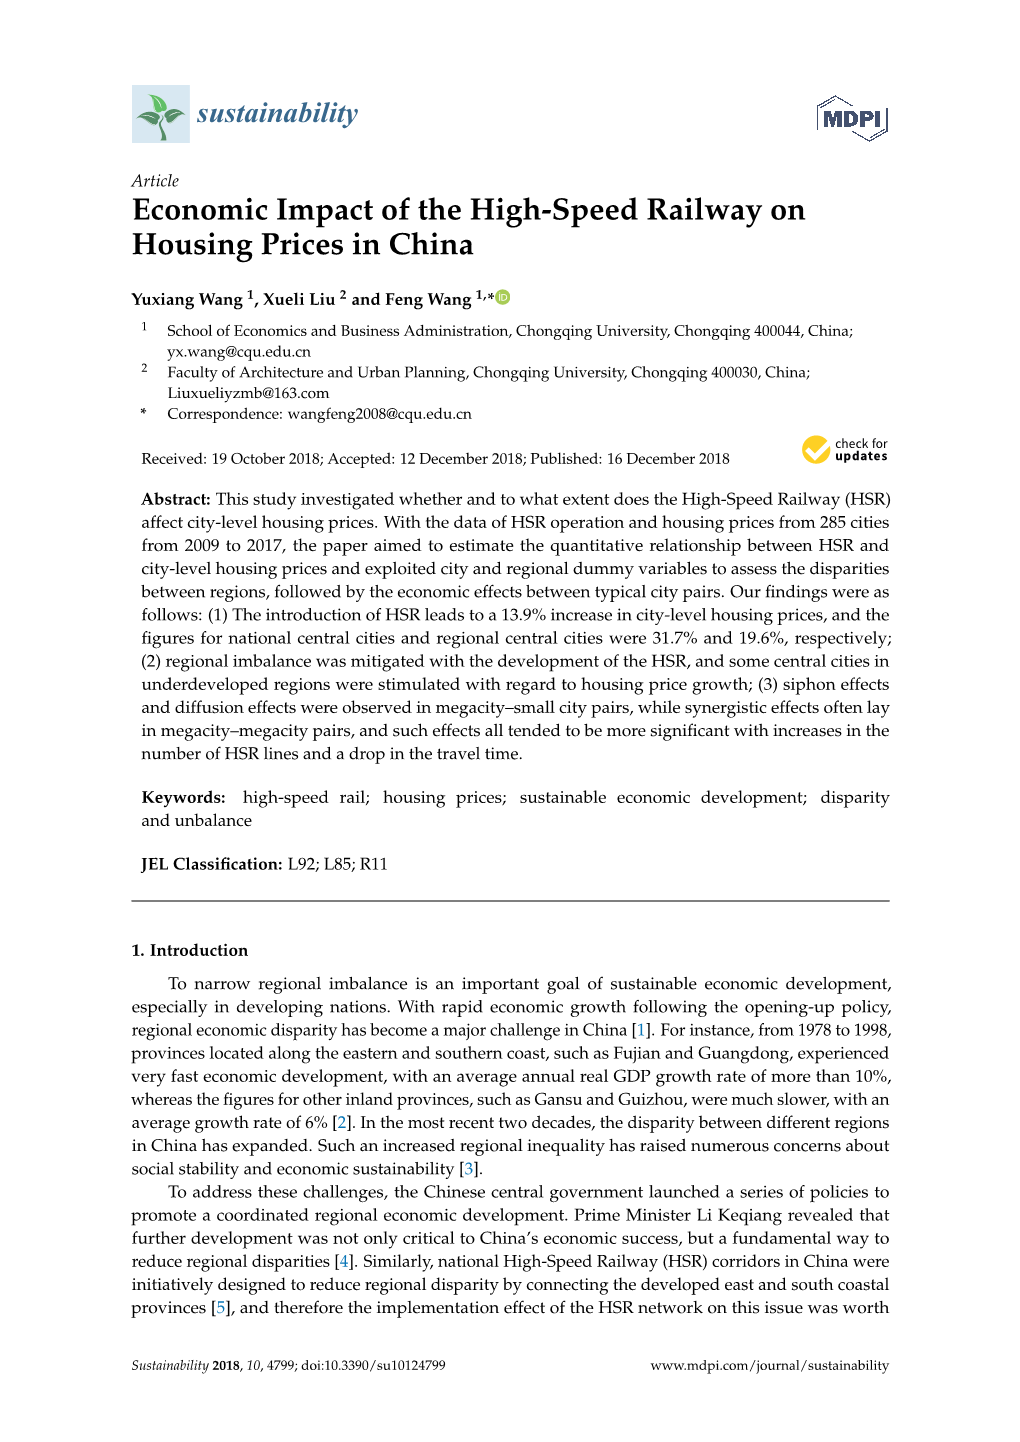 Economic Impact of the High-Speed Railway on Housing Prices in China